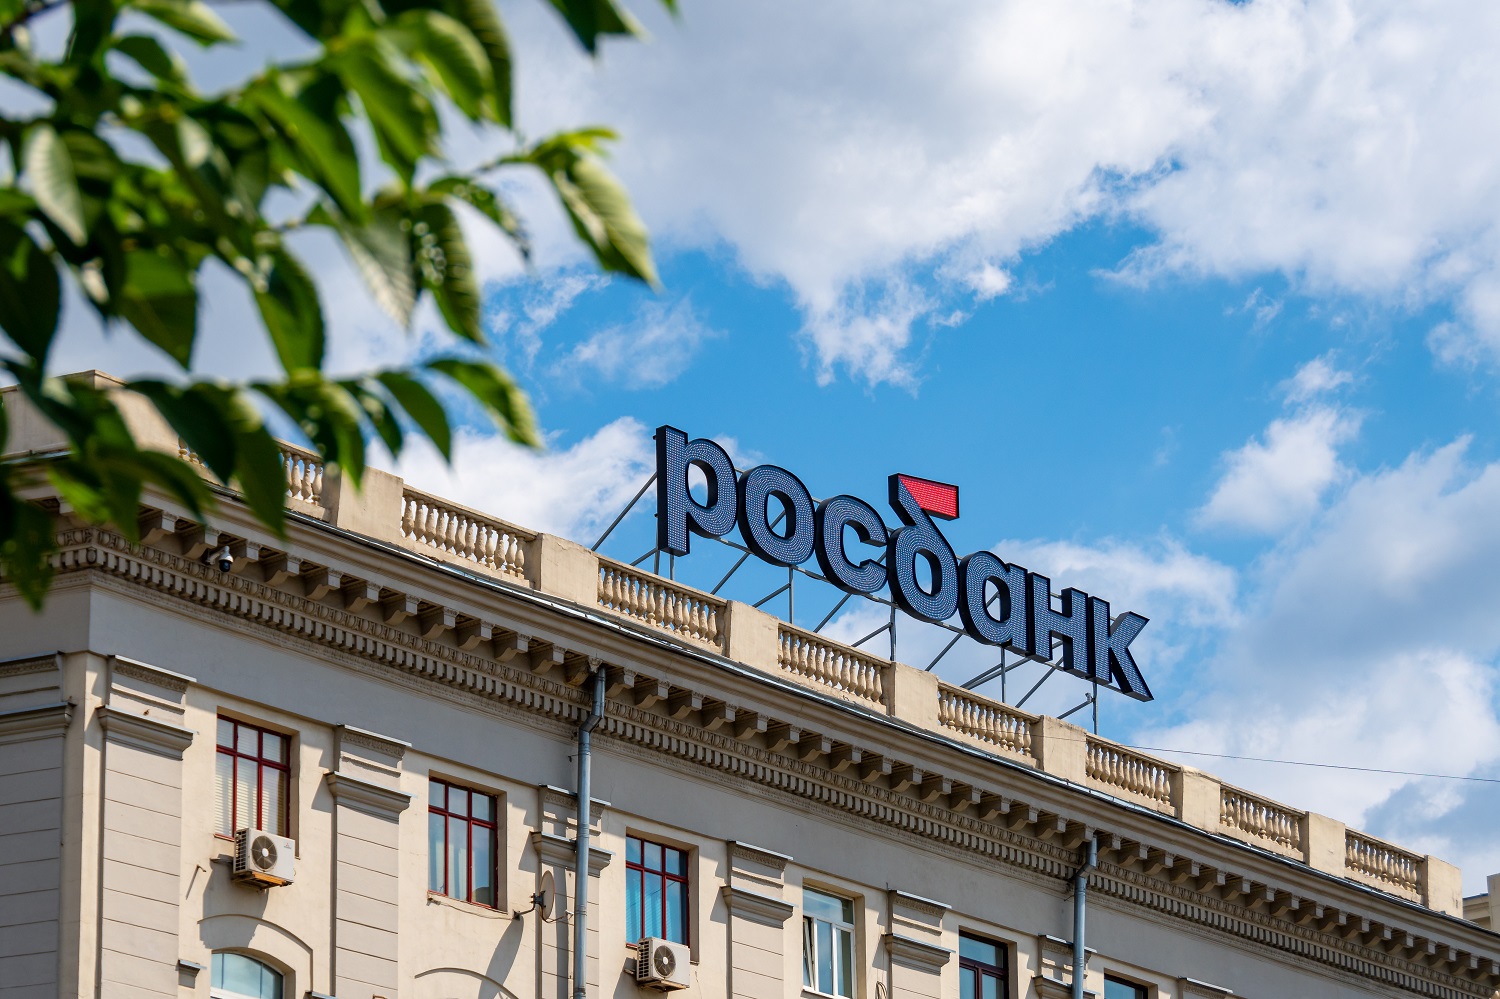 The Rosbank logo on a building in Moscow, Russia.